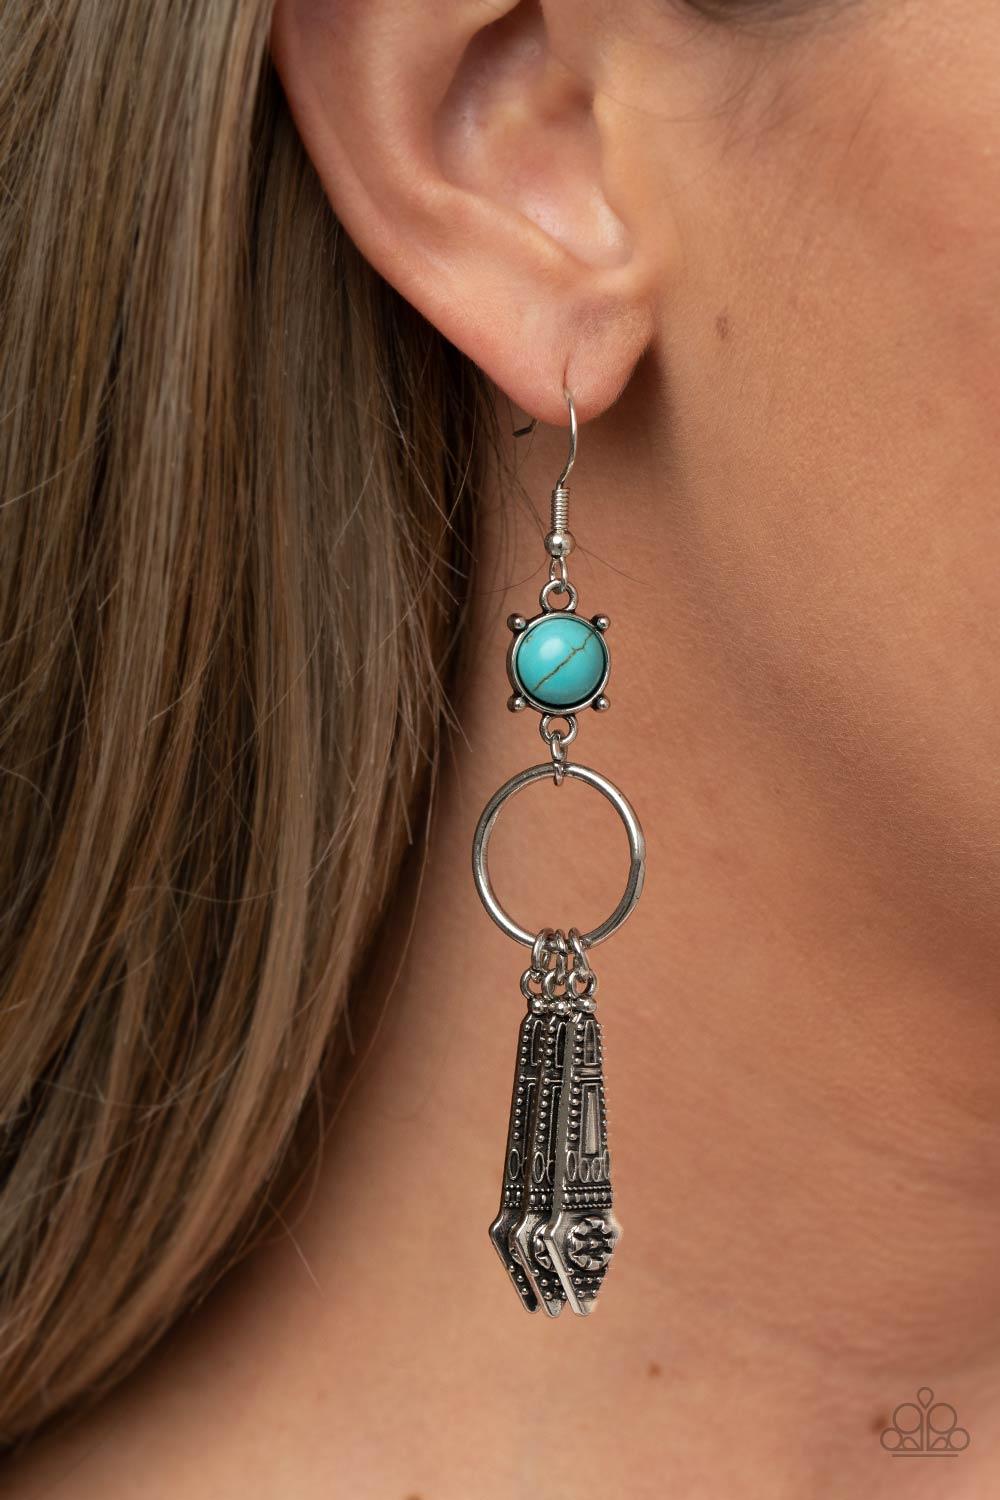 Paparazzi Accessories Prana Paradise - Blue Embellished with dainty flowers, flared silver bars glide along the bottom of a dainty silver ring that attaches to a turquoise stone fitting, creating a whimsical lure. Earring attaches to a standard fishhook f